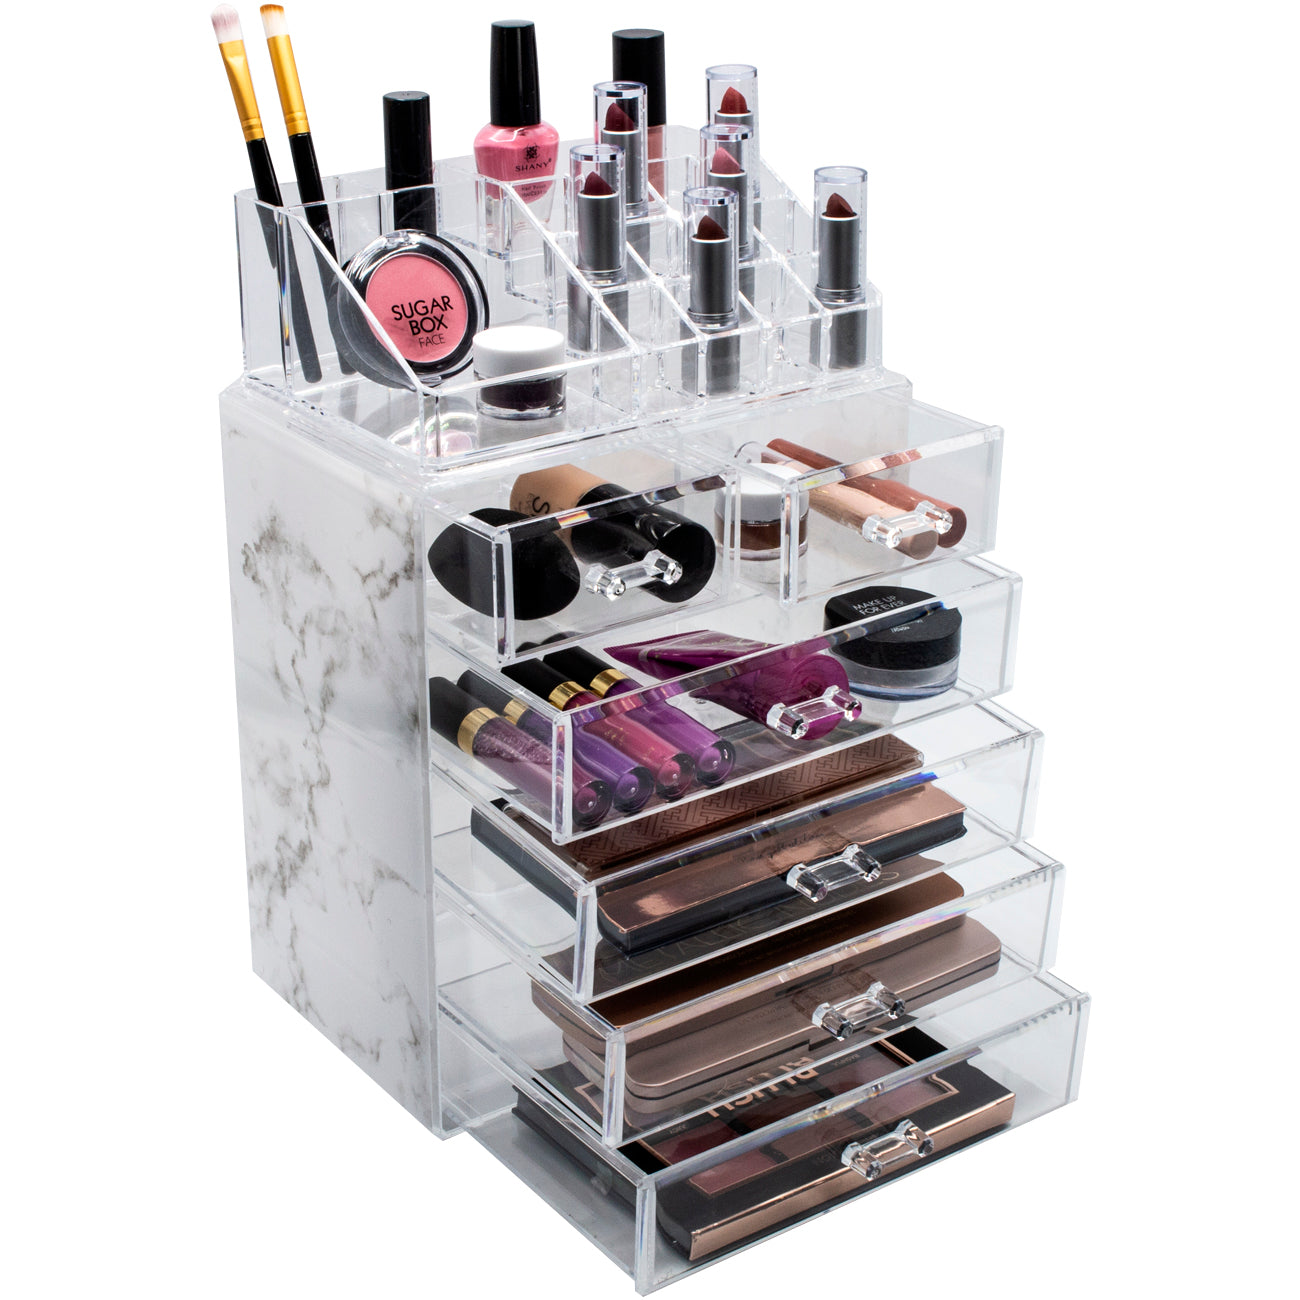 Small Makeup Organizer Set - Clear – Sorbus Beauty